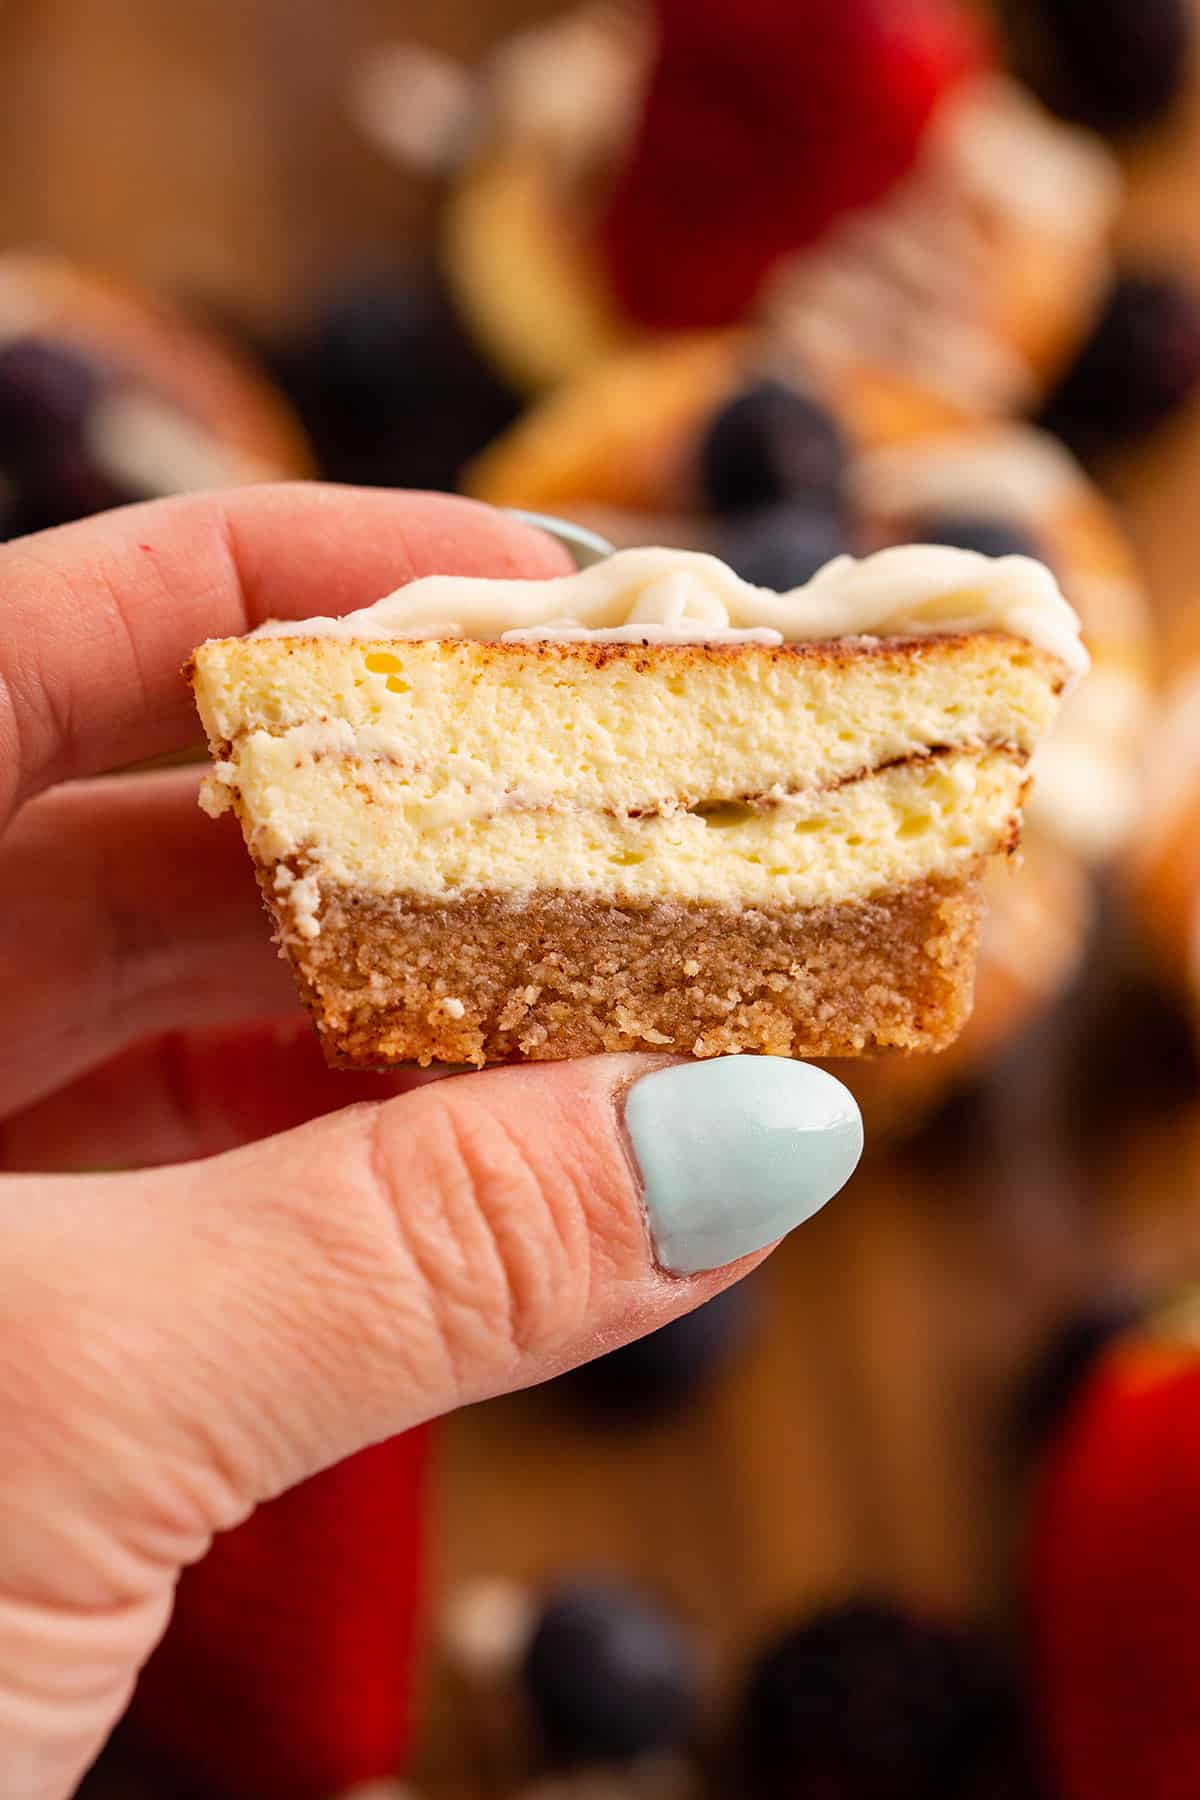 A hand holding up a cinnamon roll cheesecake, cut open to show the inside.